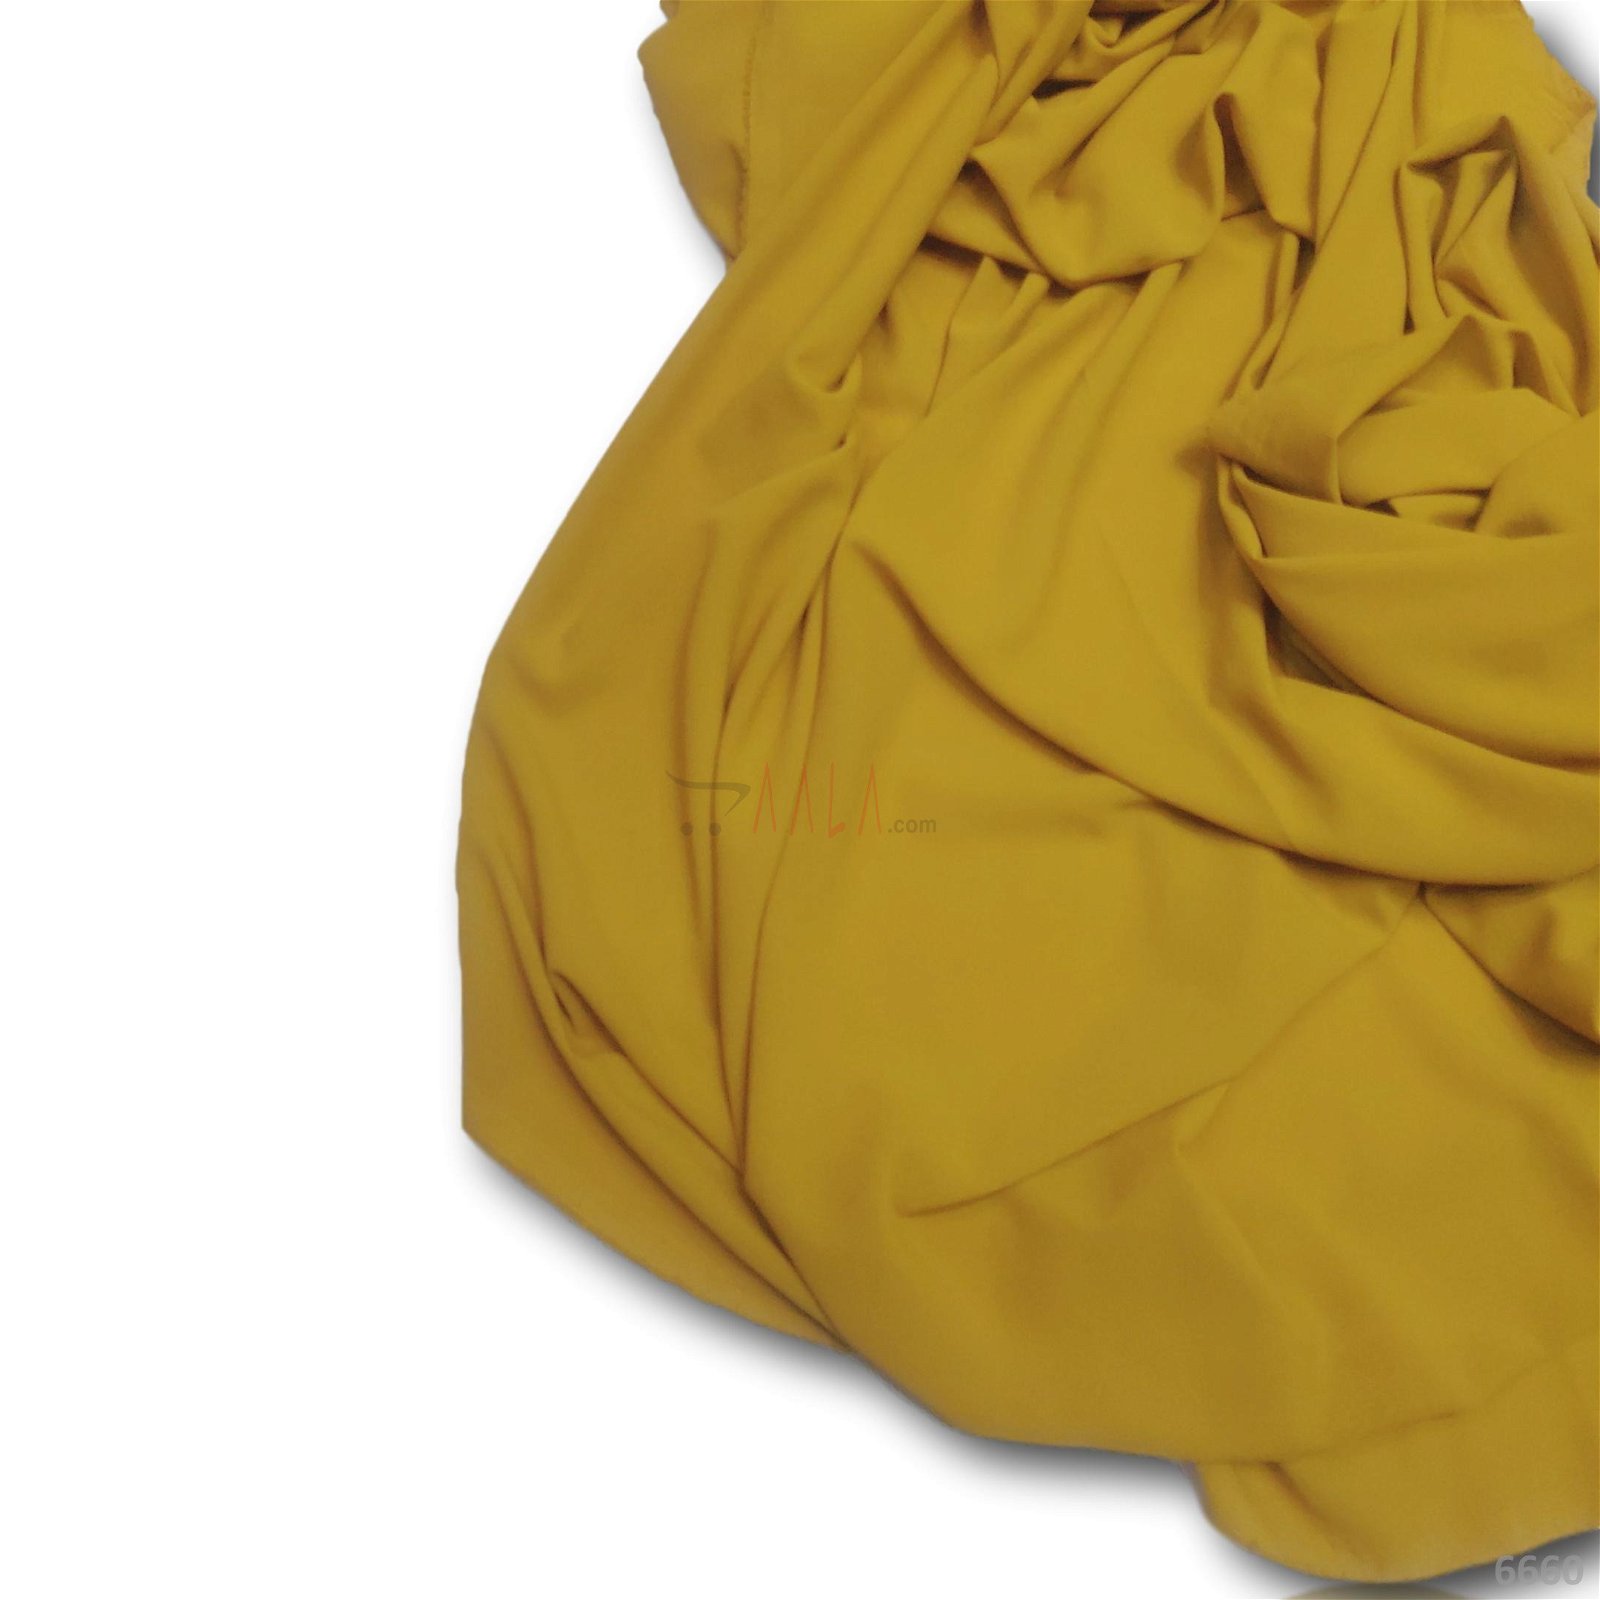 Double Double-Georgette Poly-ester 44-Inches YELLOW Per-Metre #6660